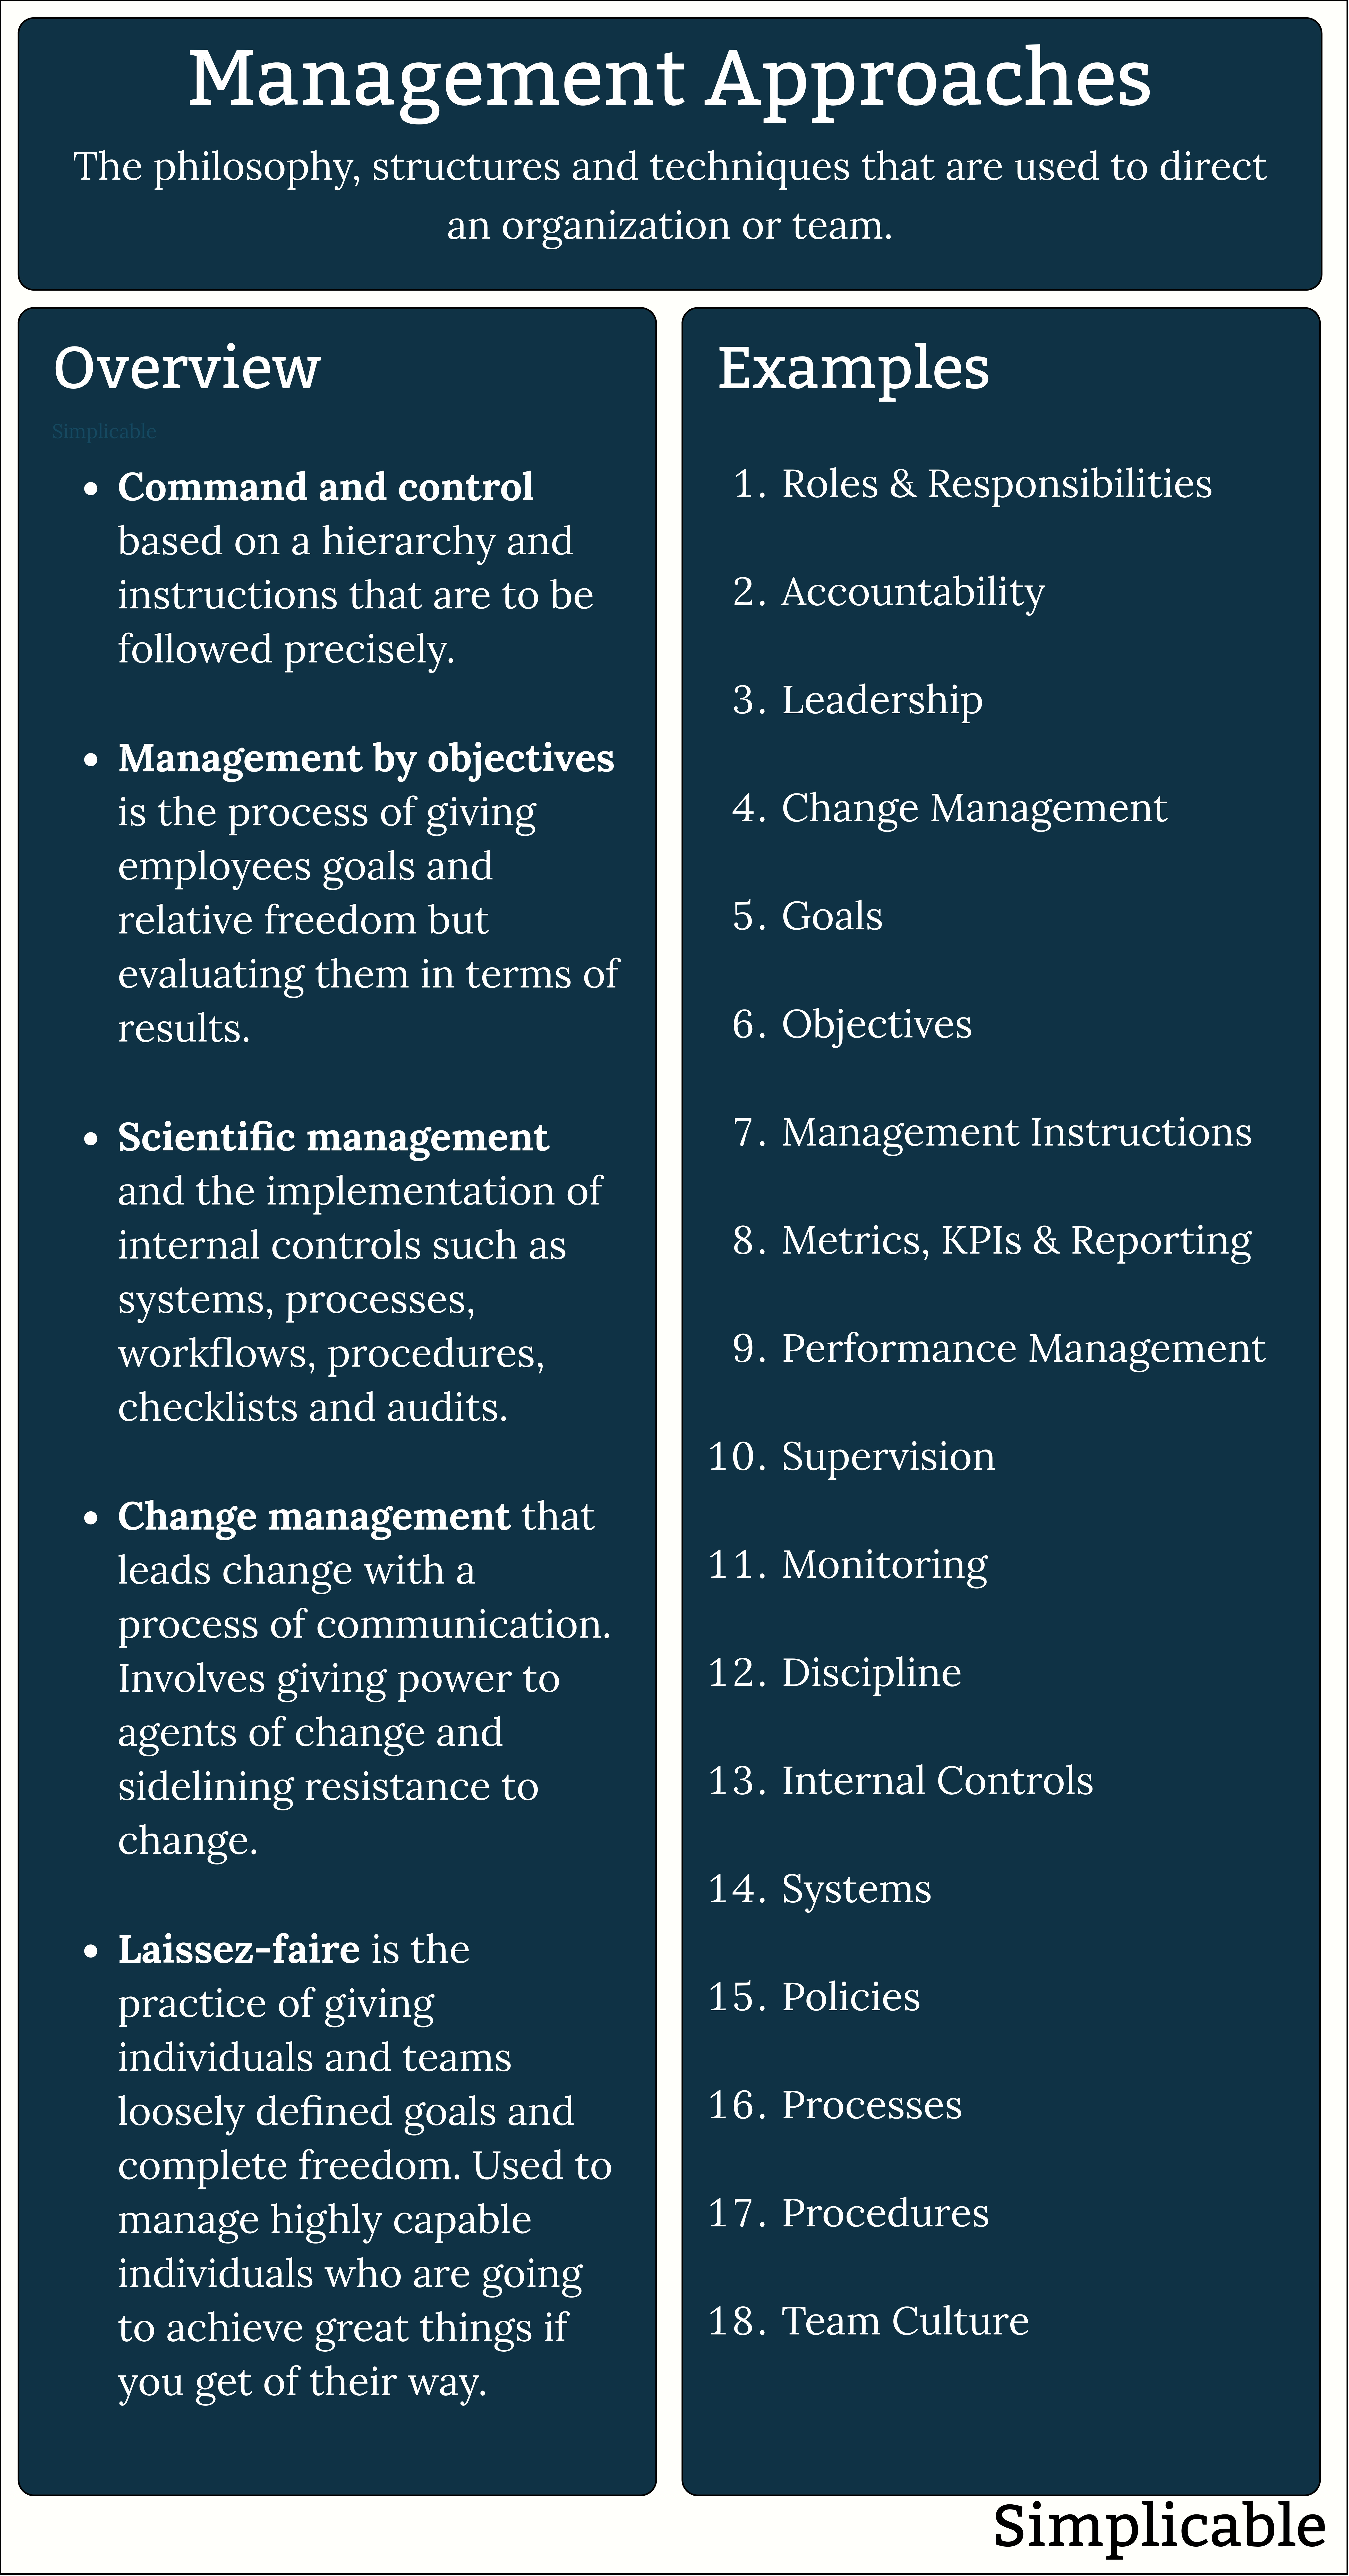 management approaches overview and examples